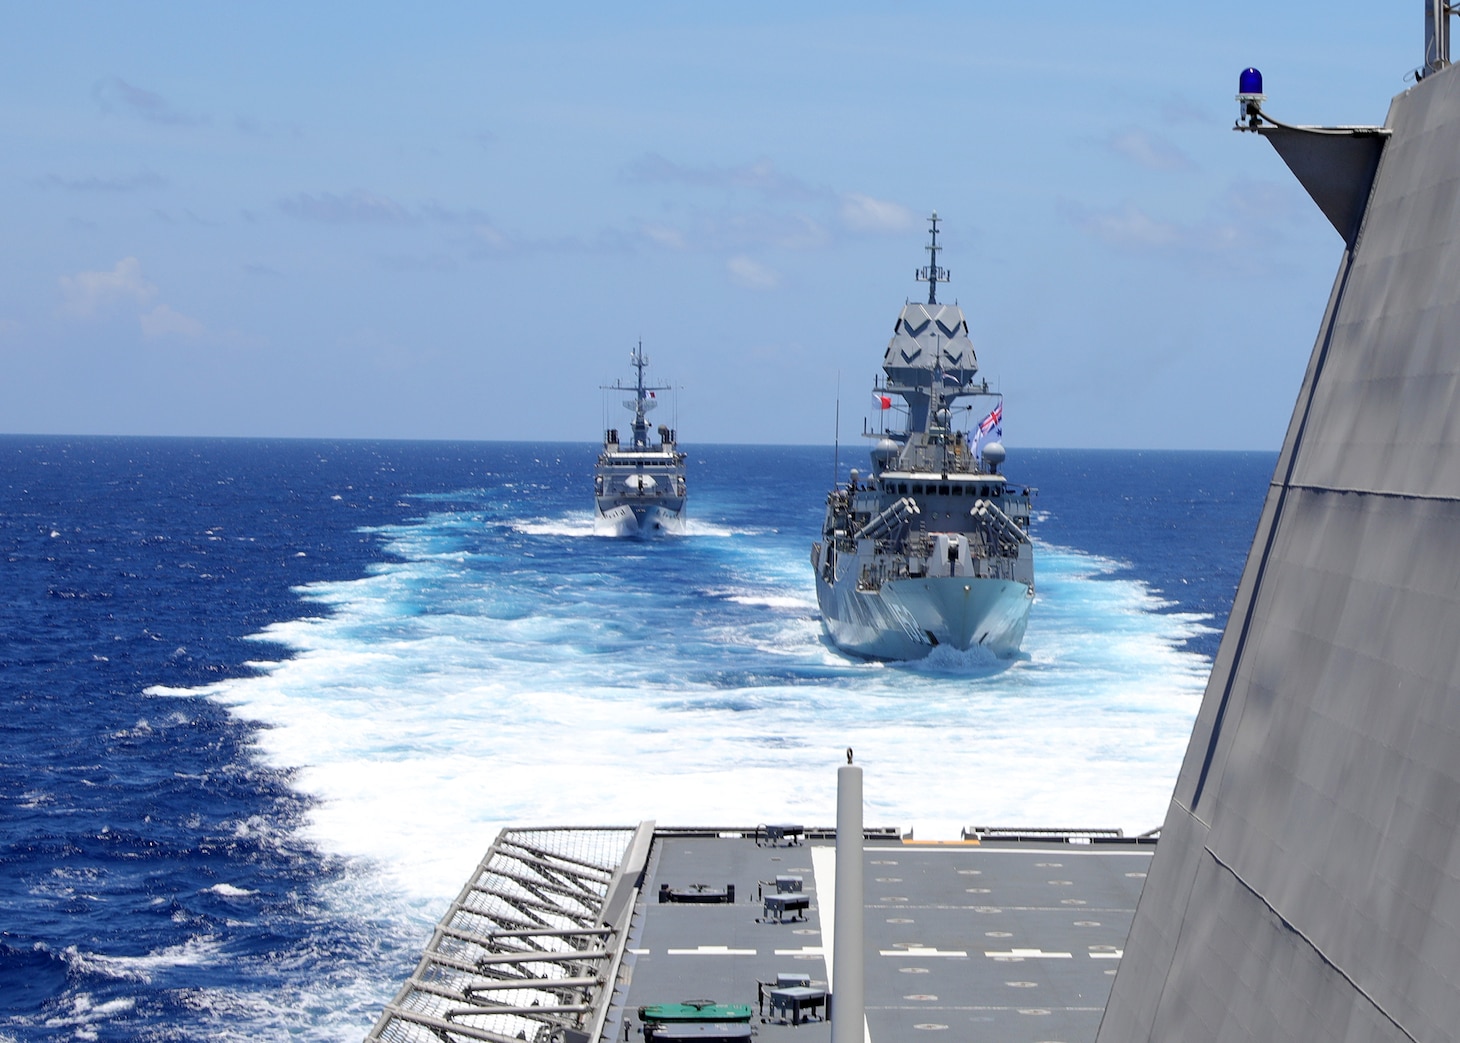 Royal Australian Navy frigate HMAS Warramunga (FFG 152), front, and French Navy Floréal-class frigate FS Vendémiaire (F 734), back, trail behind Independence-variant littoral combat ship USS Mobile (LCS 26), during trilateral operations in the South China Sea. Mobile, part of Destroyer Squadron 7, is on a rotational deployment operating in the U.S. 7th Fleet area of operations to enhance interoperability with allies and partners and serve as a ready-response force in support of a free and open Indo-Pacific region. (U.S. Navy photo by Mass Communication Specialist 1st Class Liz Dunagan/ RELEASED)